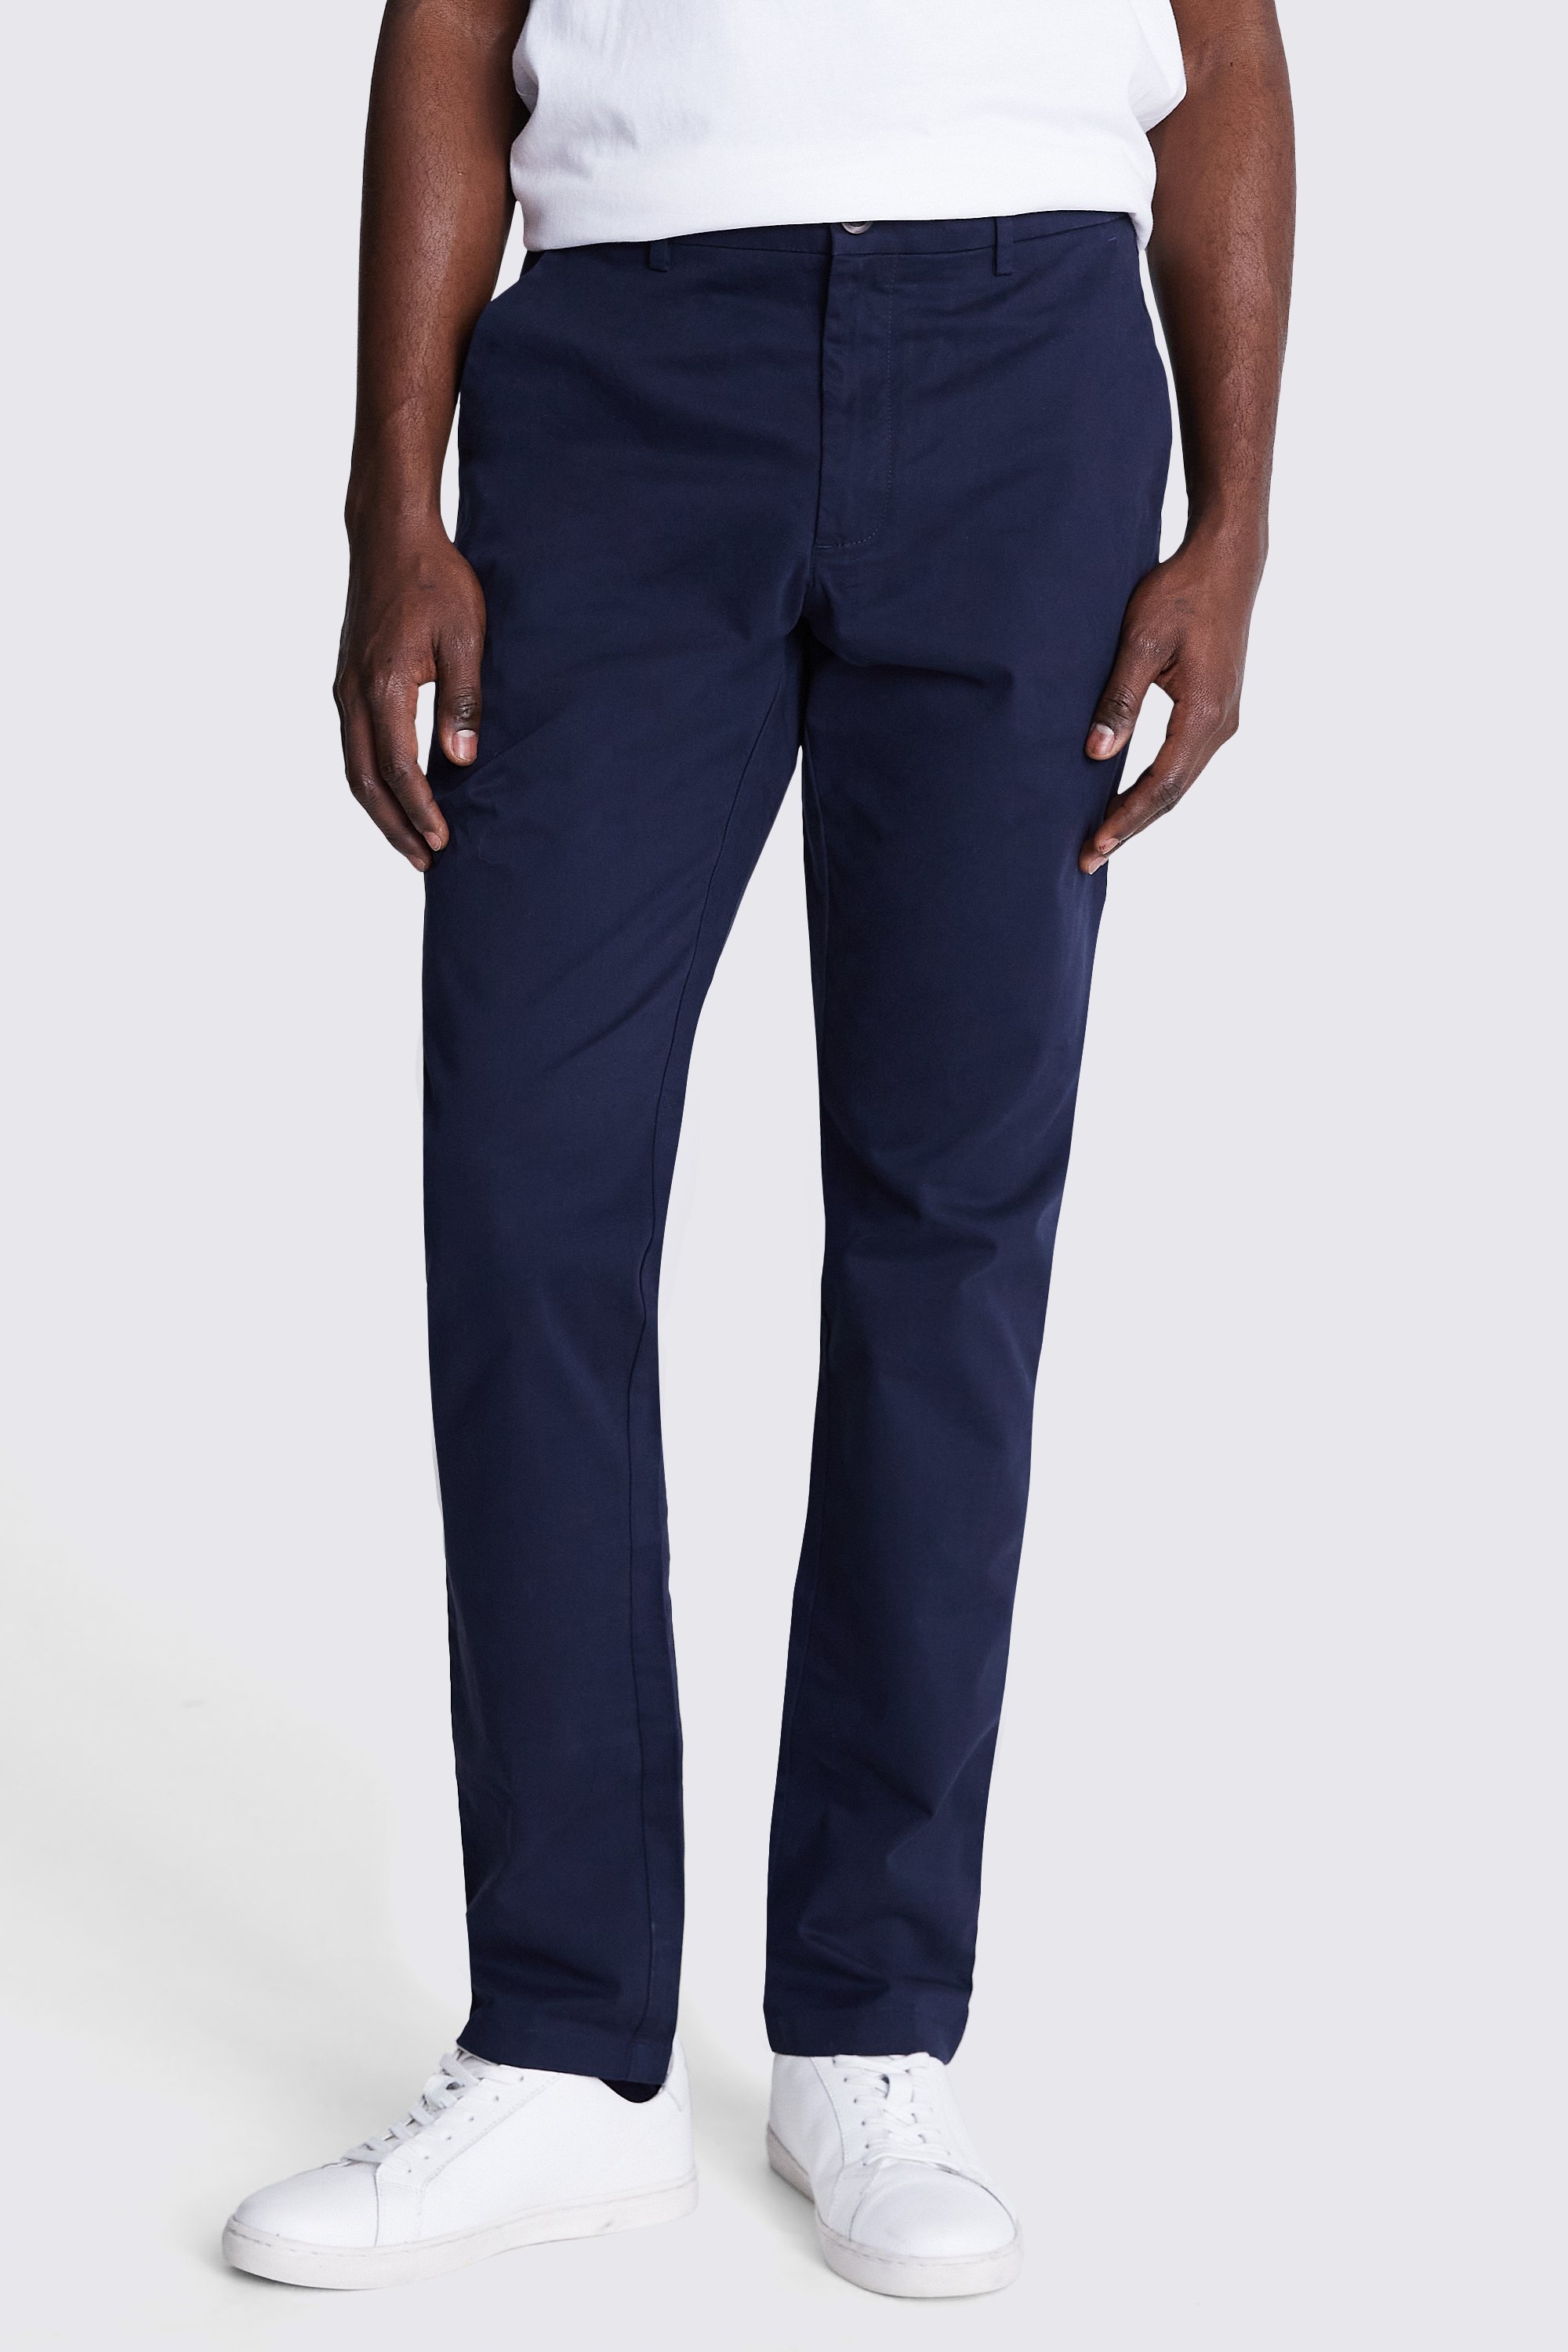 Tailored Fit Navy Stretch Chinos | Buy Online at Moss